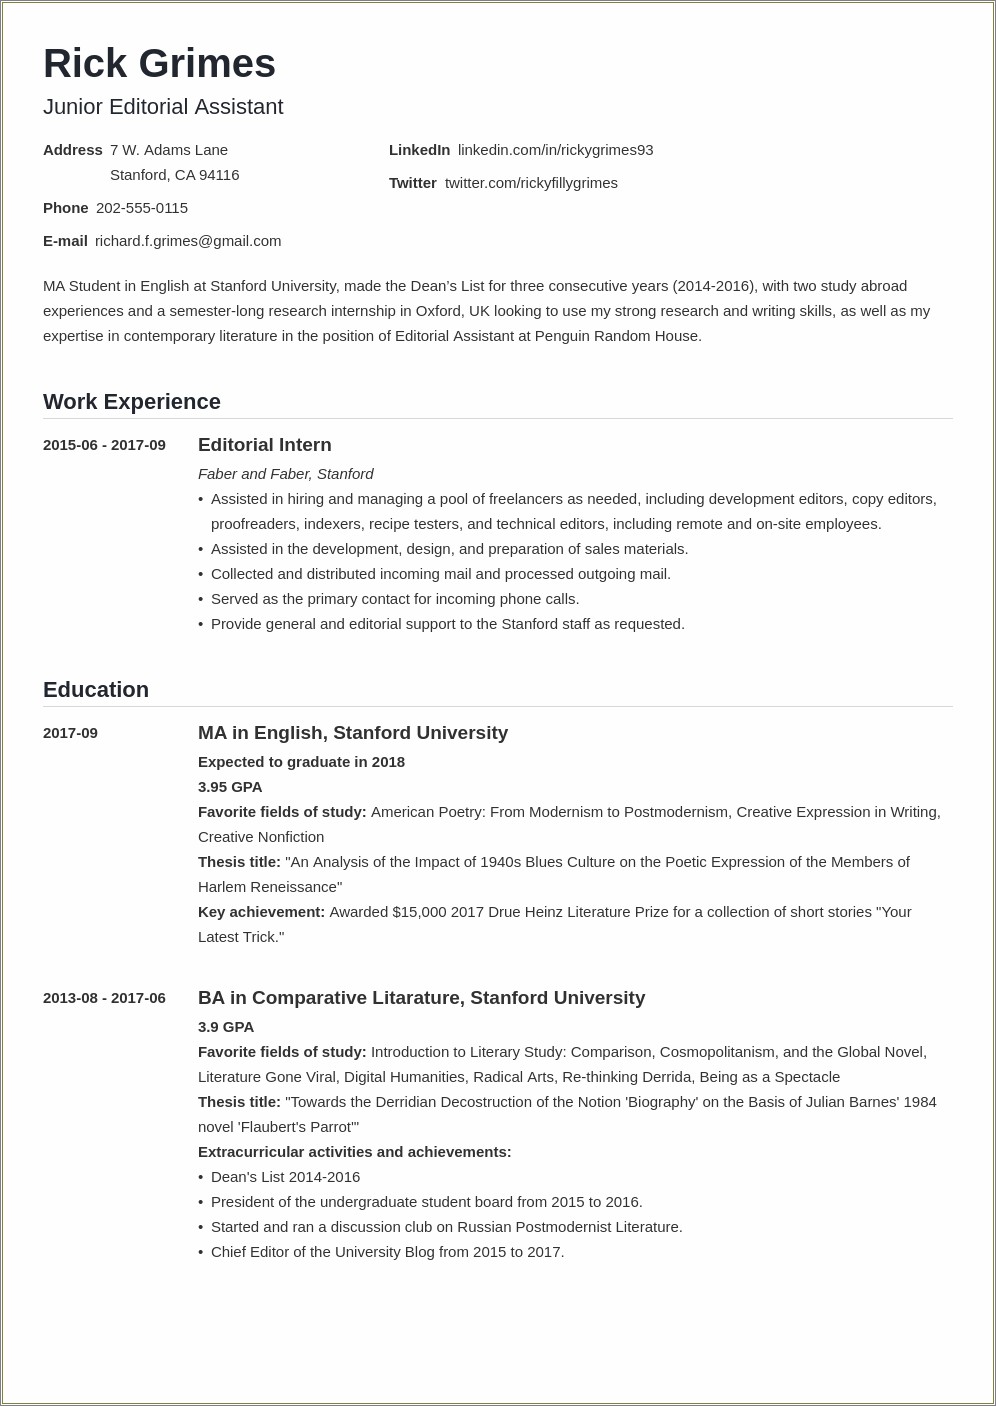 Sample Resume Objective Statements For Student